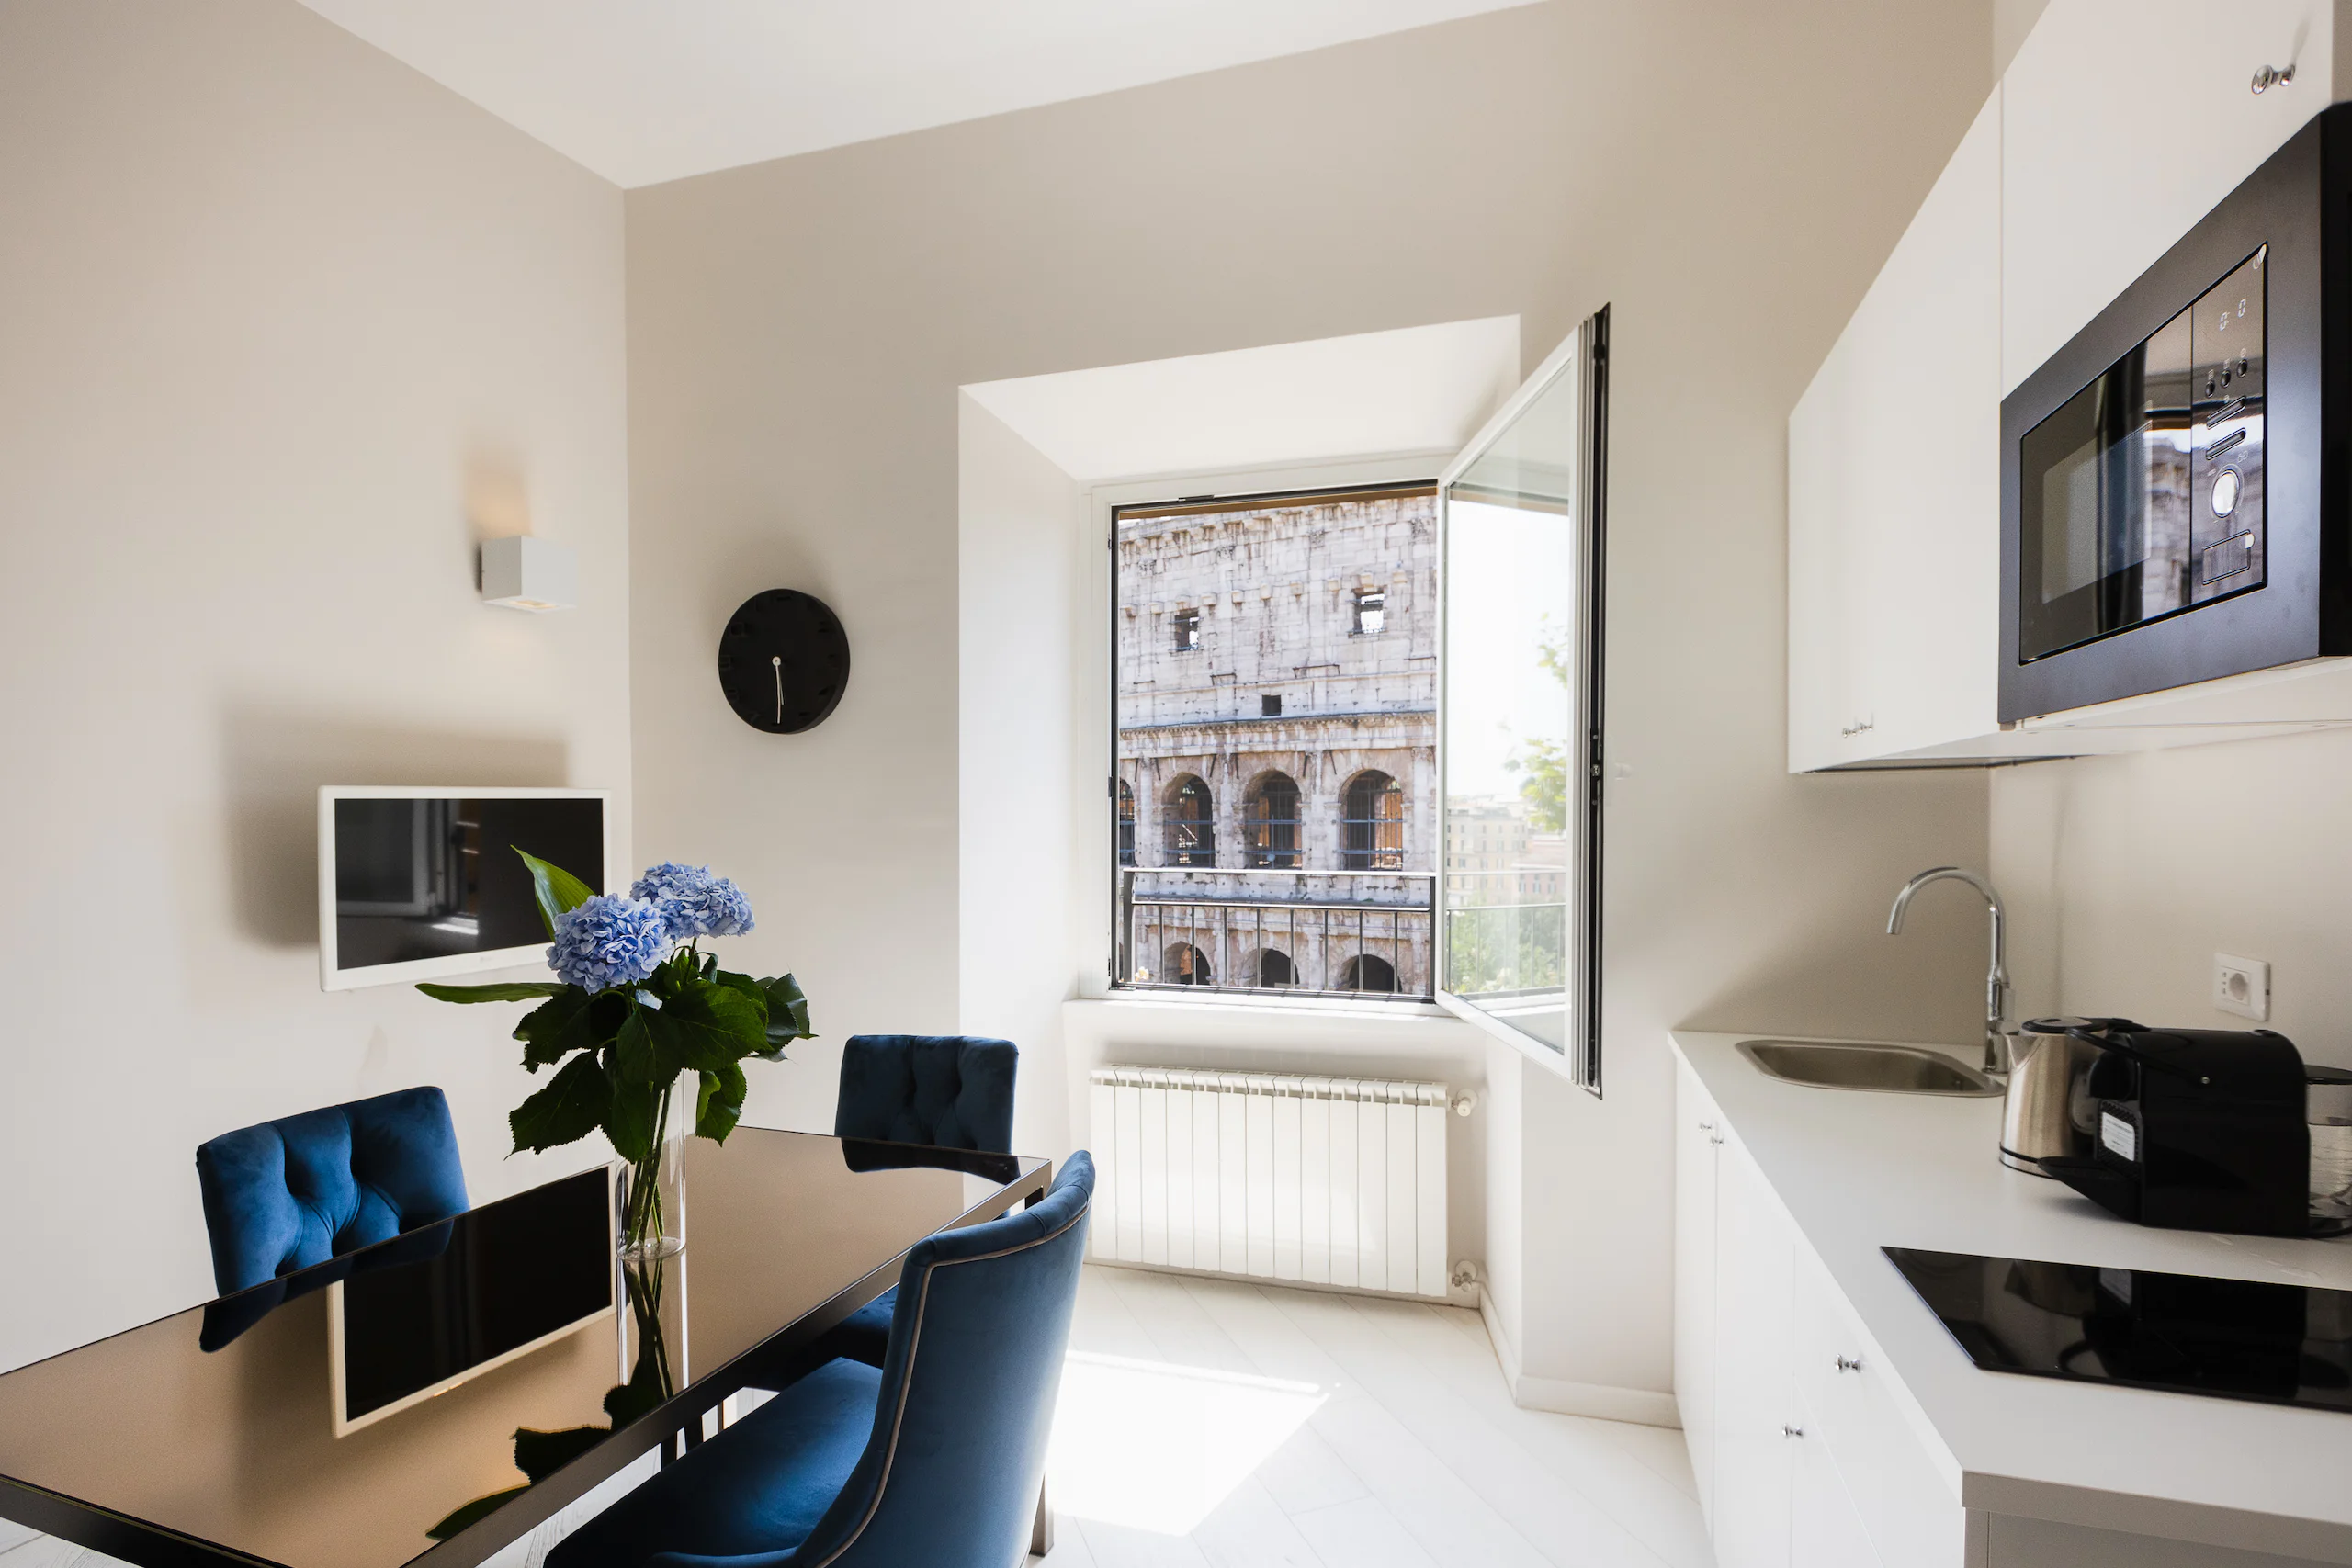 Hotels Near the Colosseum in Rome - Gladiators Ready - Kitchen with view of Colosseum